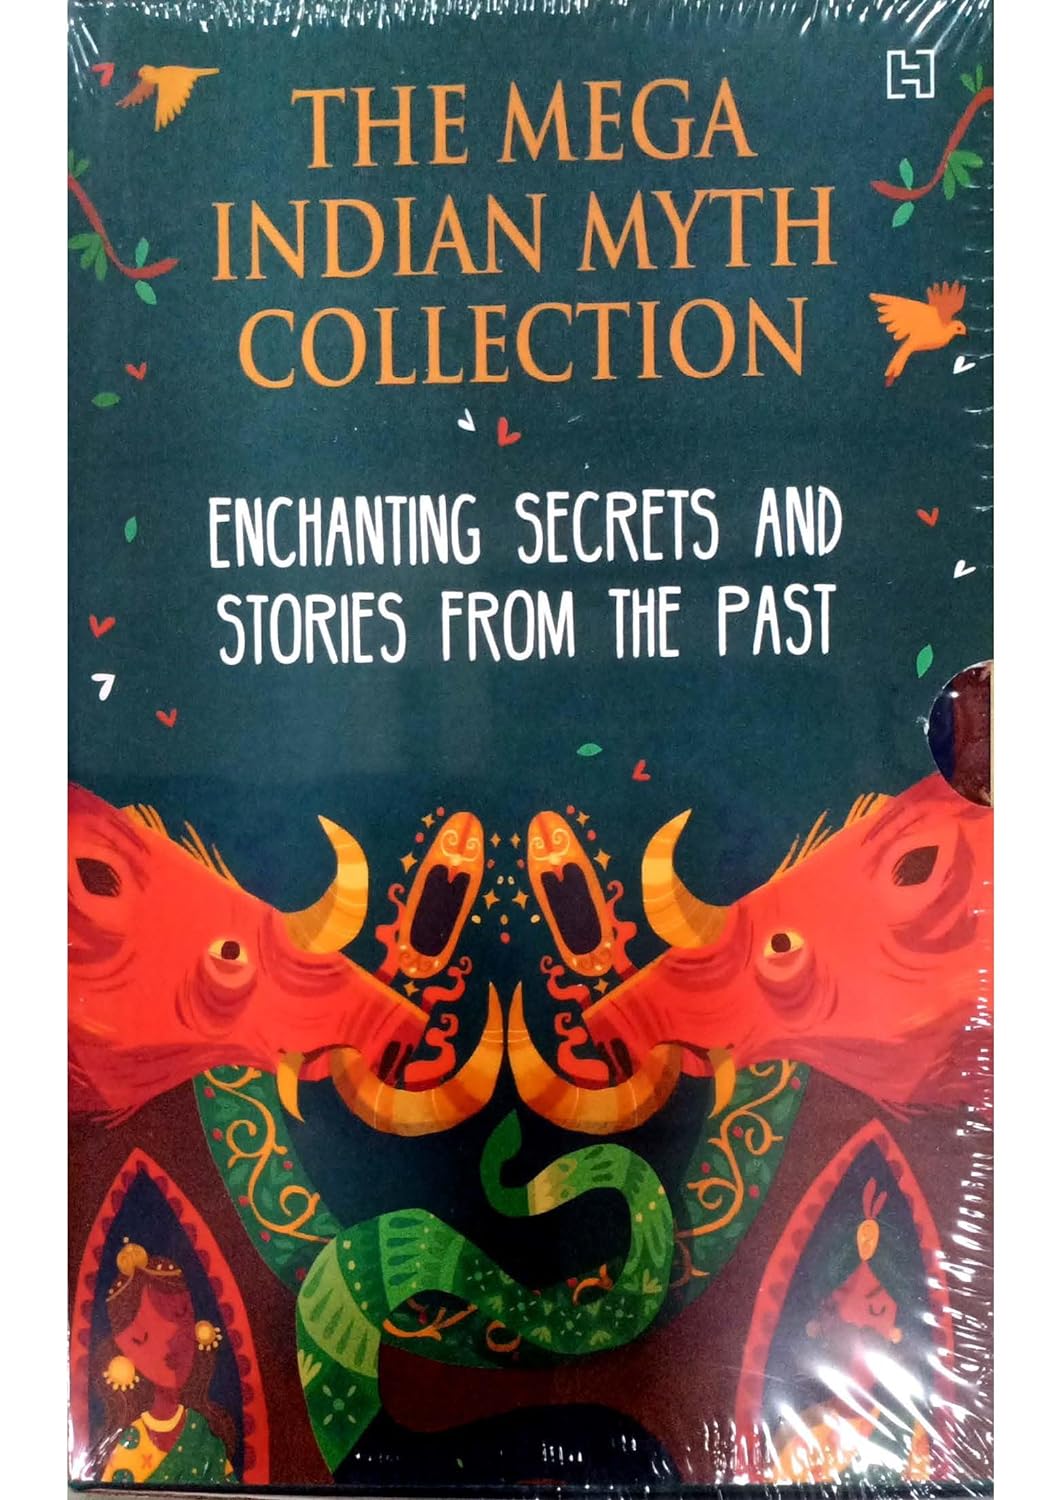 The Mega Indian Myth Collection: Enchanting Secrets and Stories from the Past